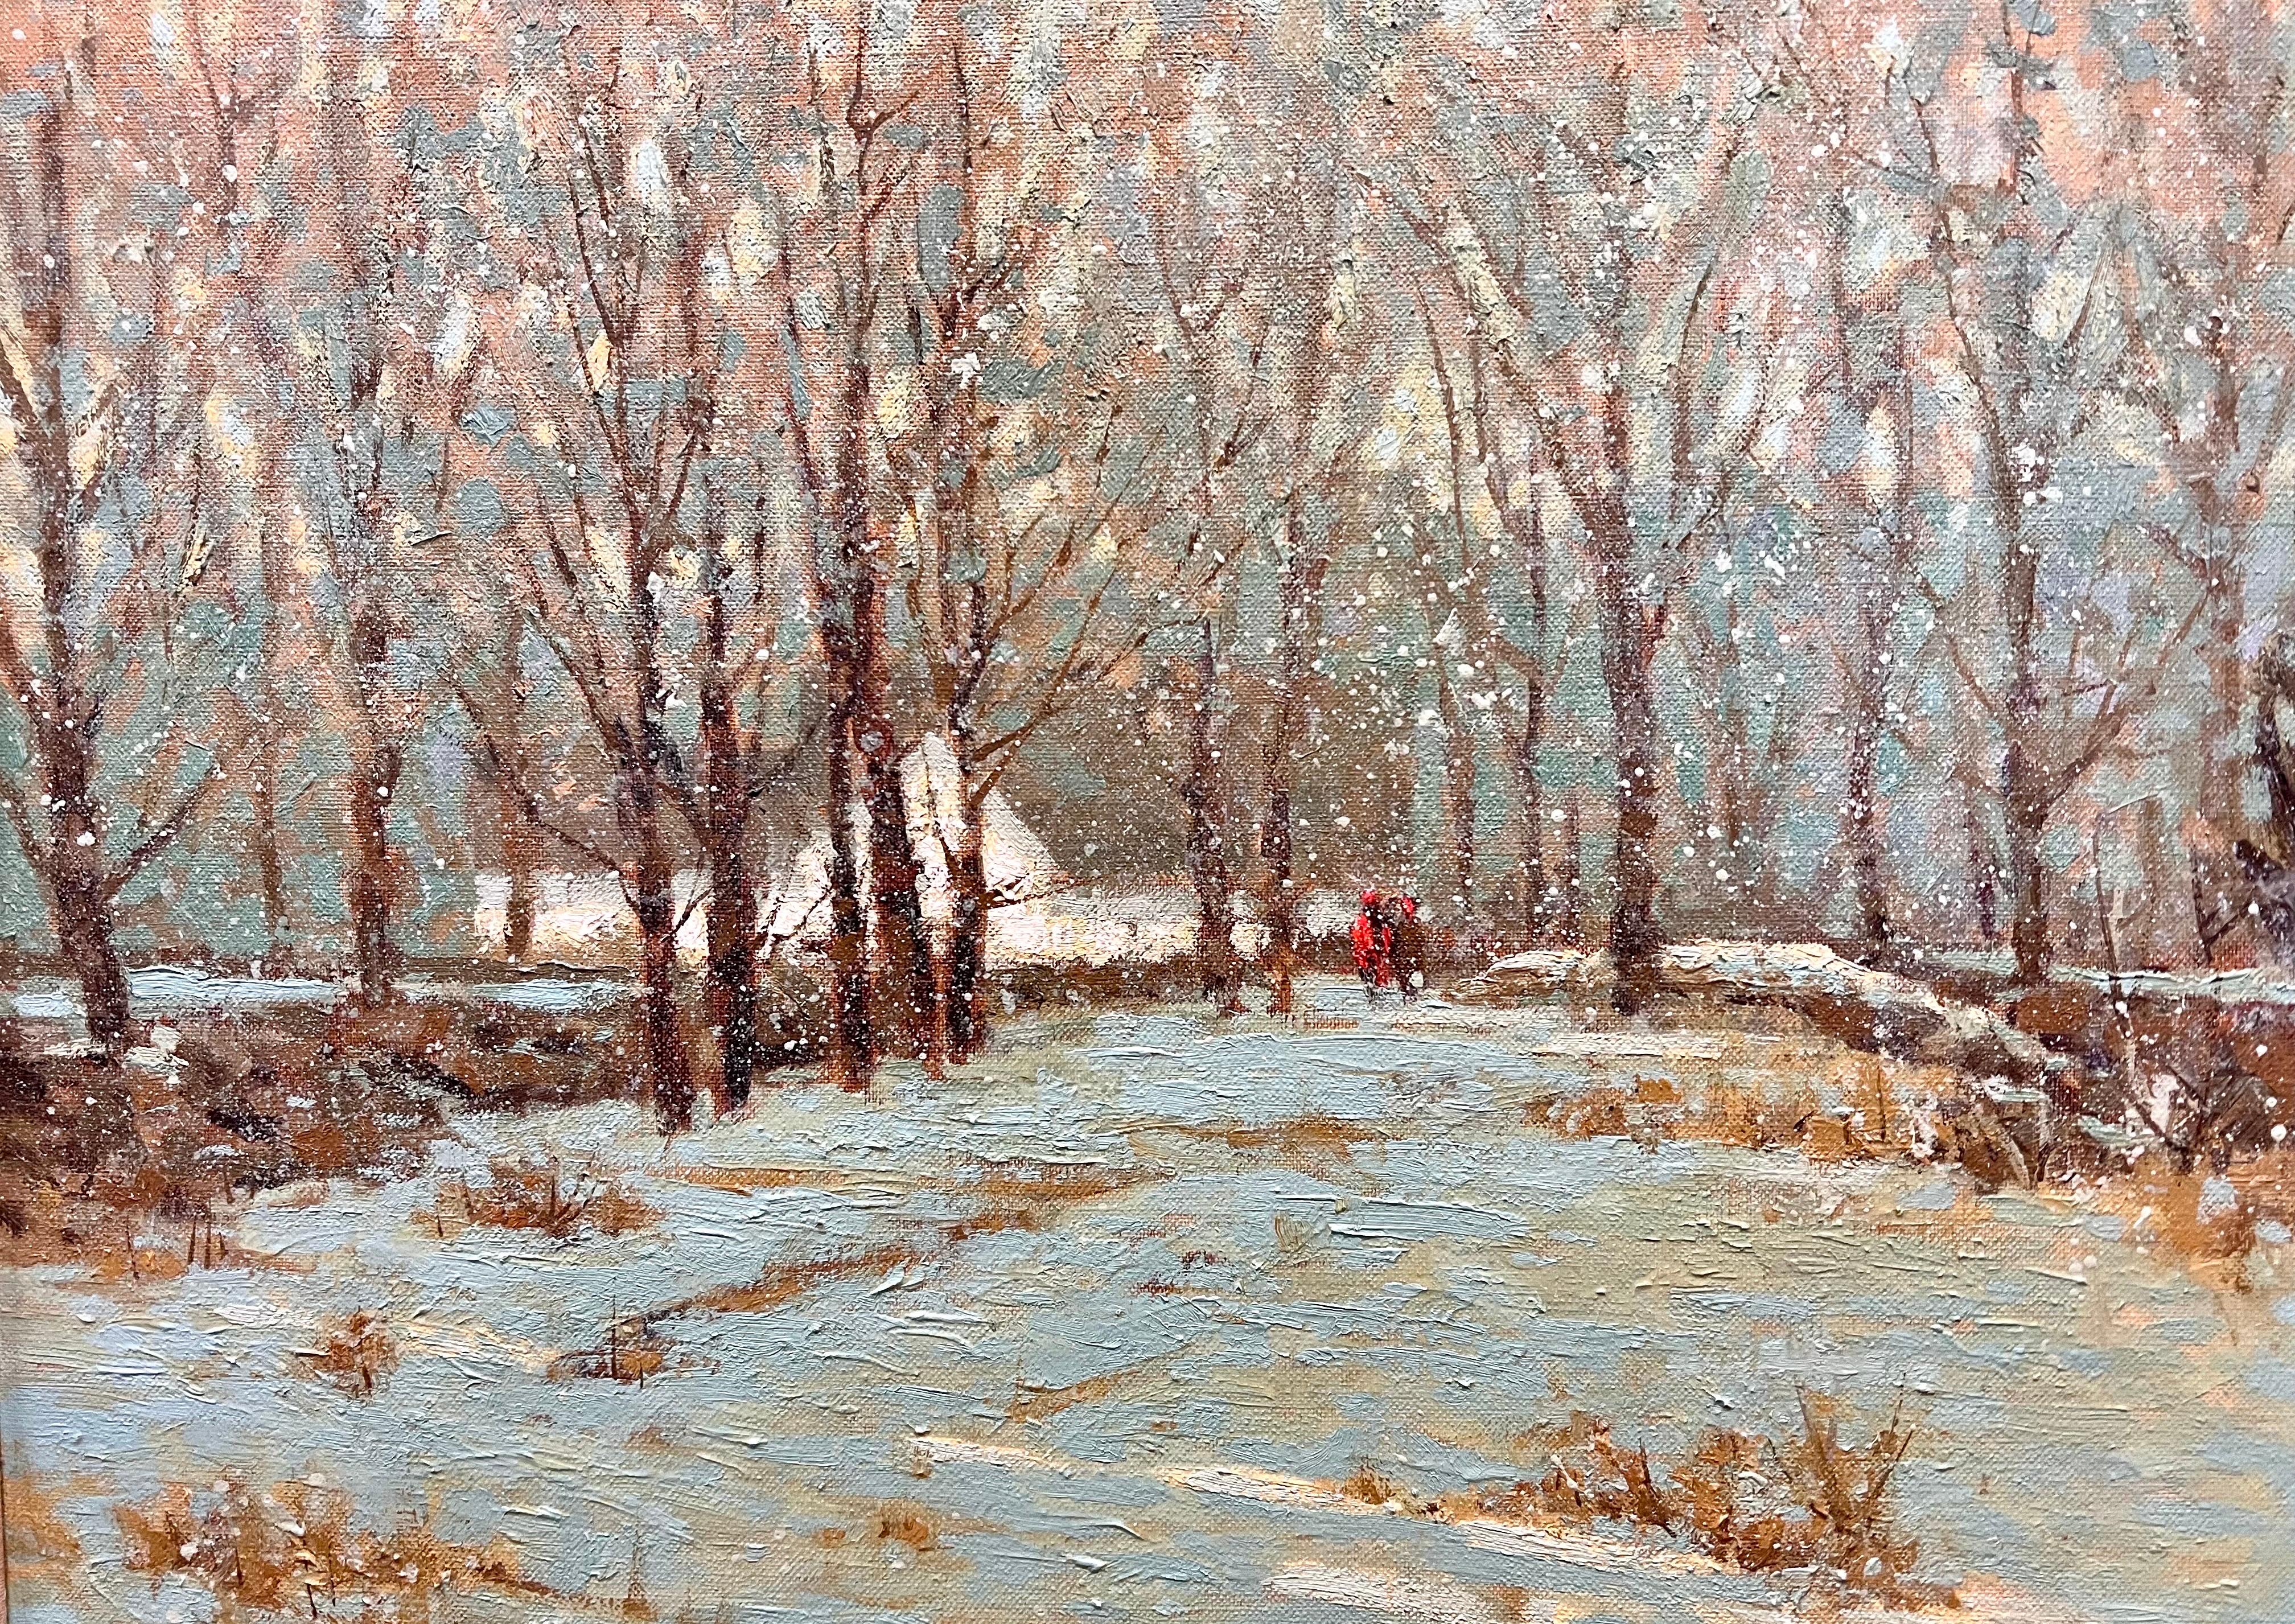 Canvas Original Signed Oil Painting of a Snow Scene By Listed Artist Deborah Cotrone For Sale